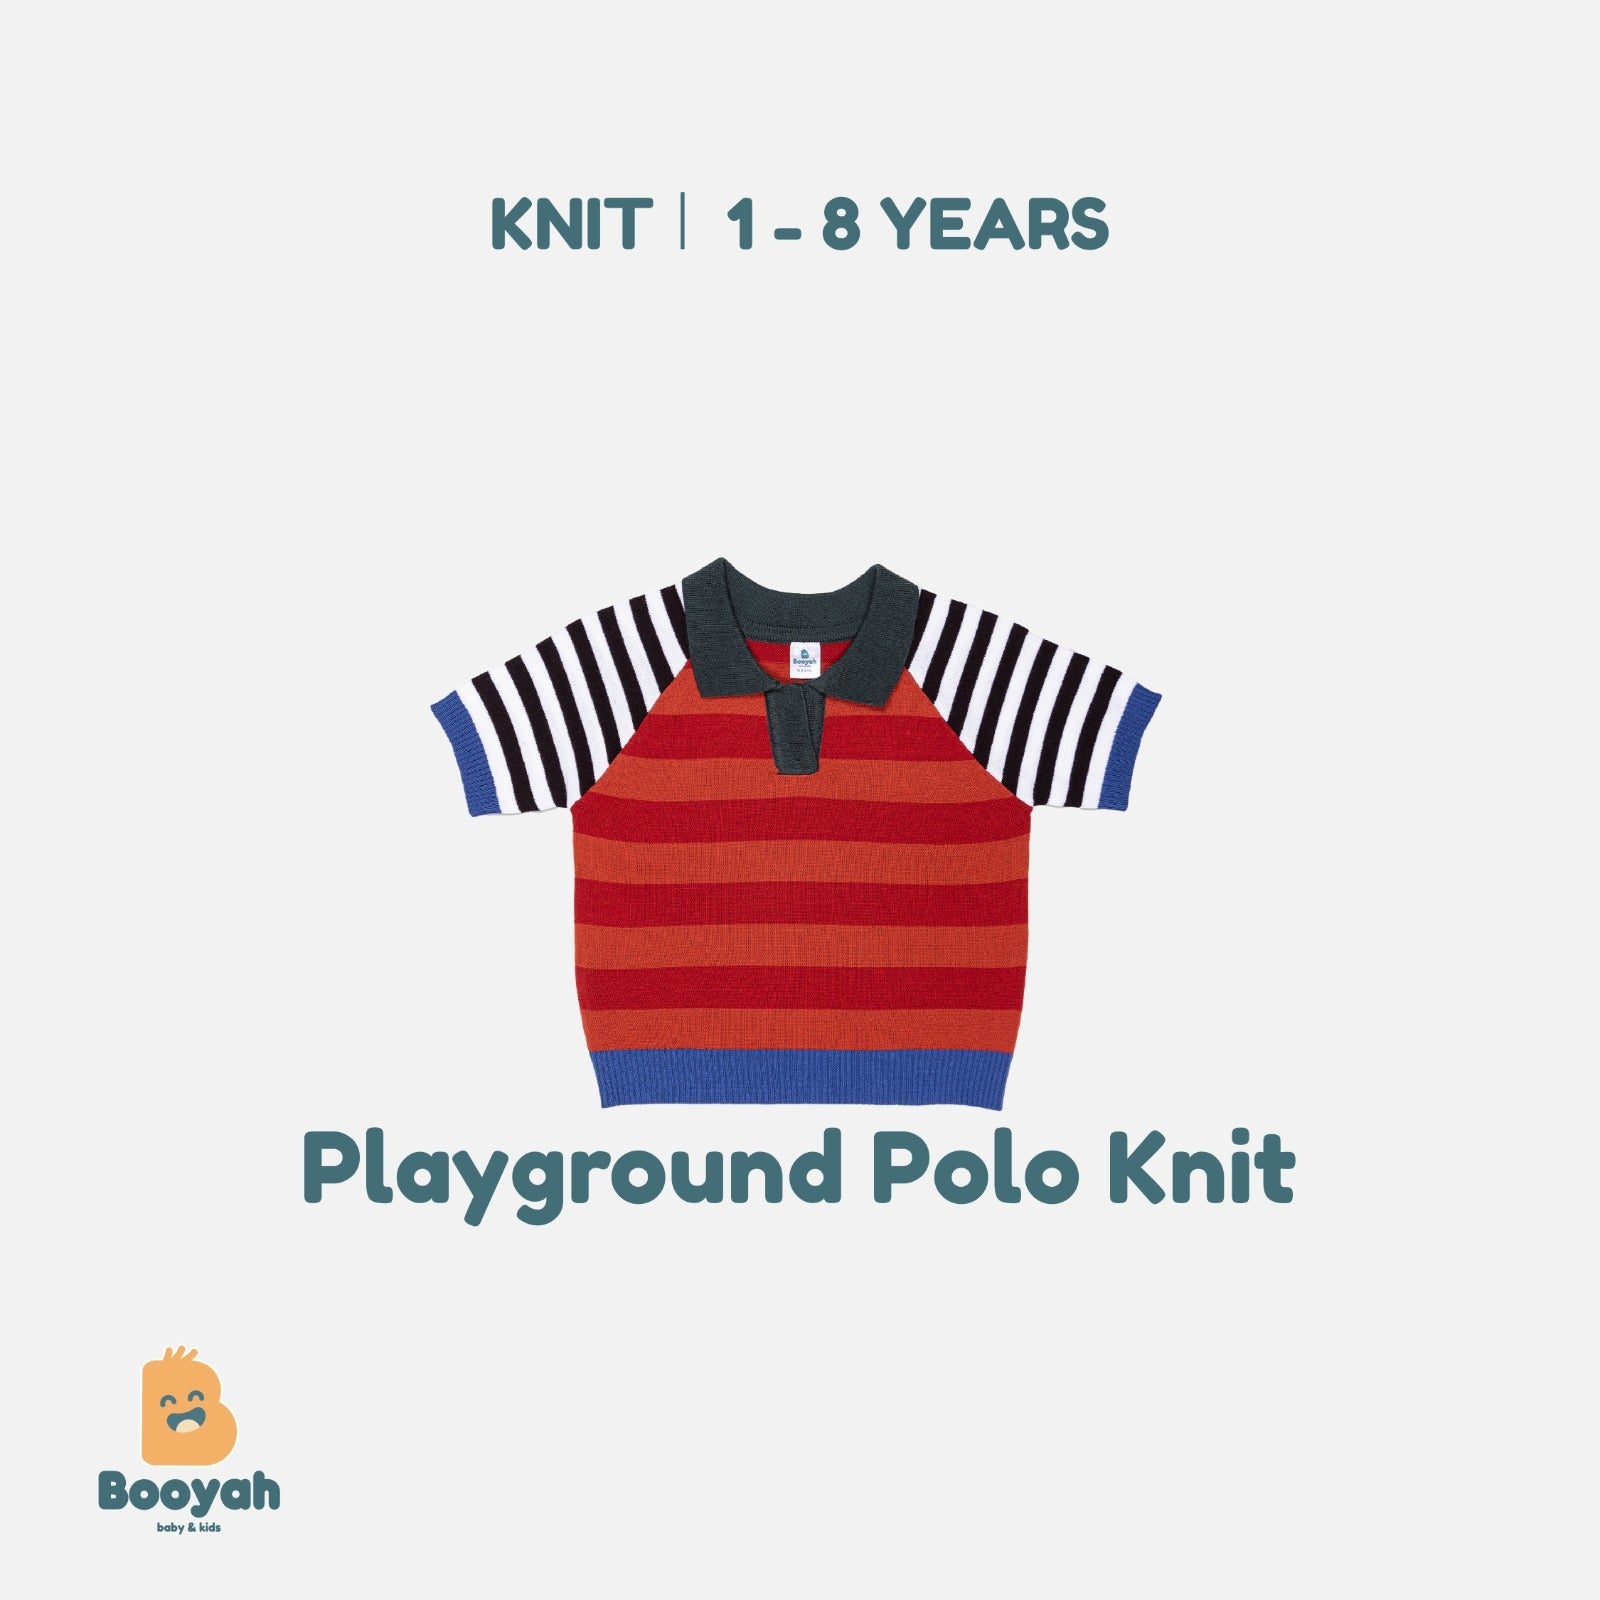 Booyah Baby & Kids Playground Polo Knit